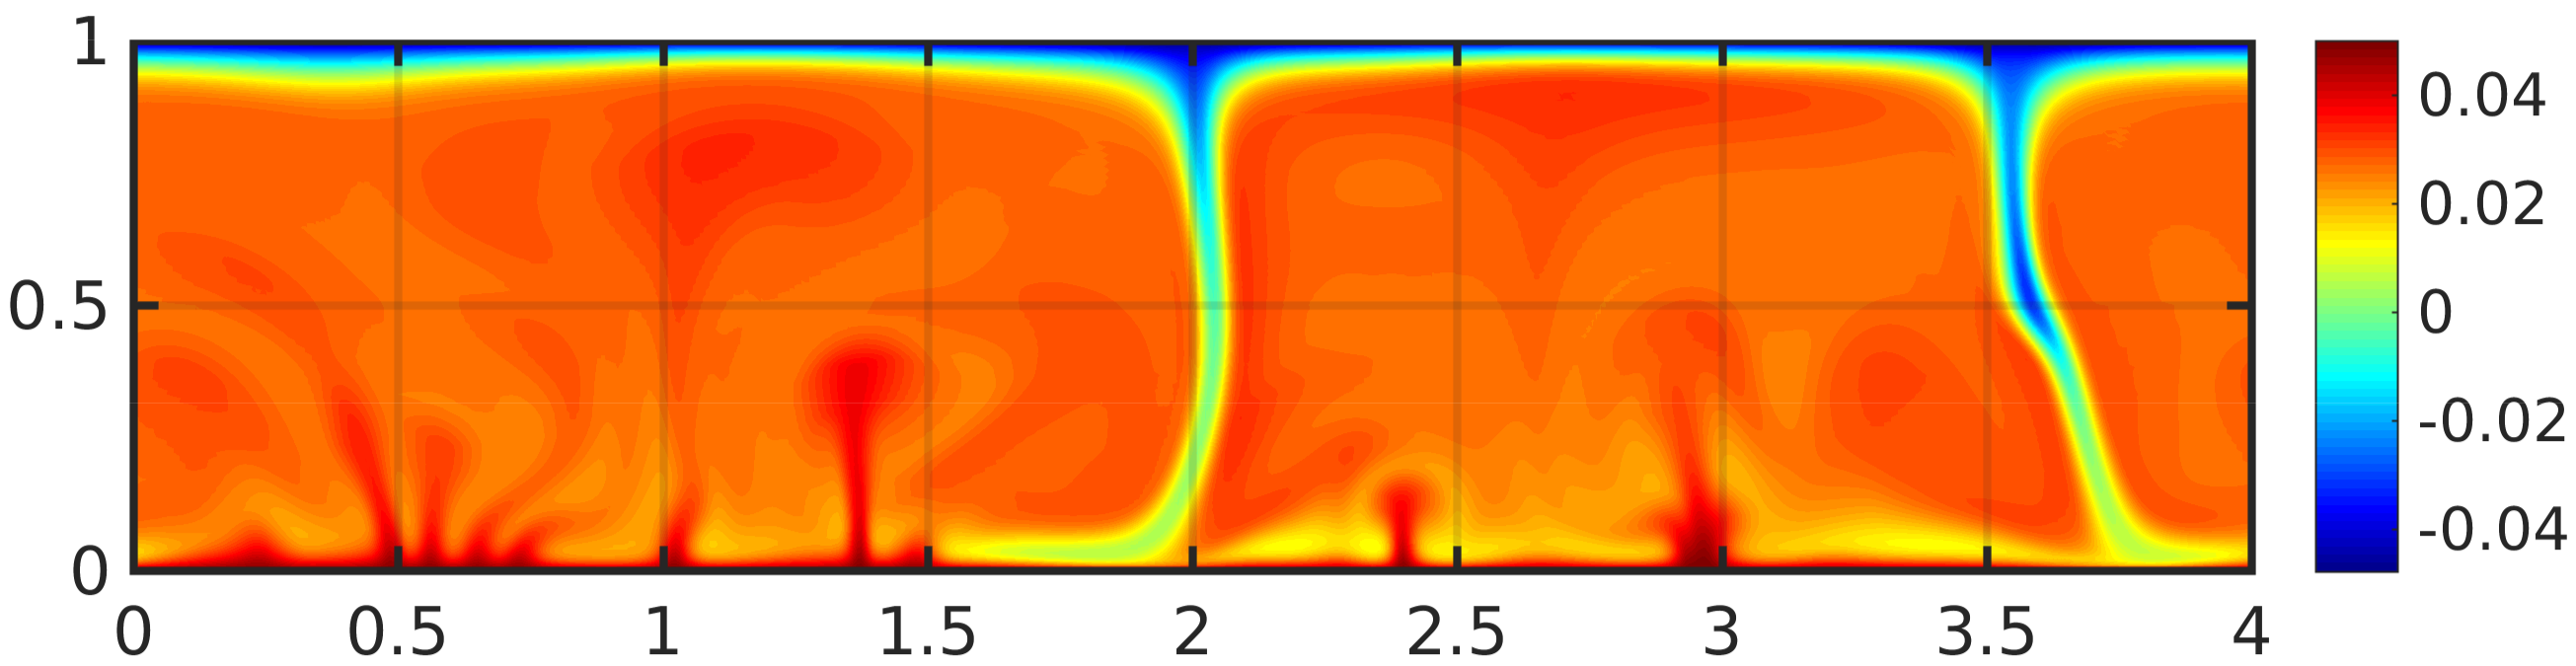 Super-isentropic temperature in a fully compressible model